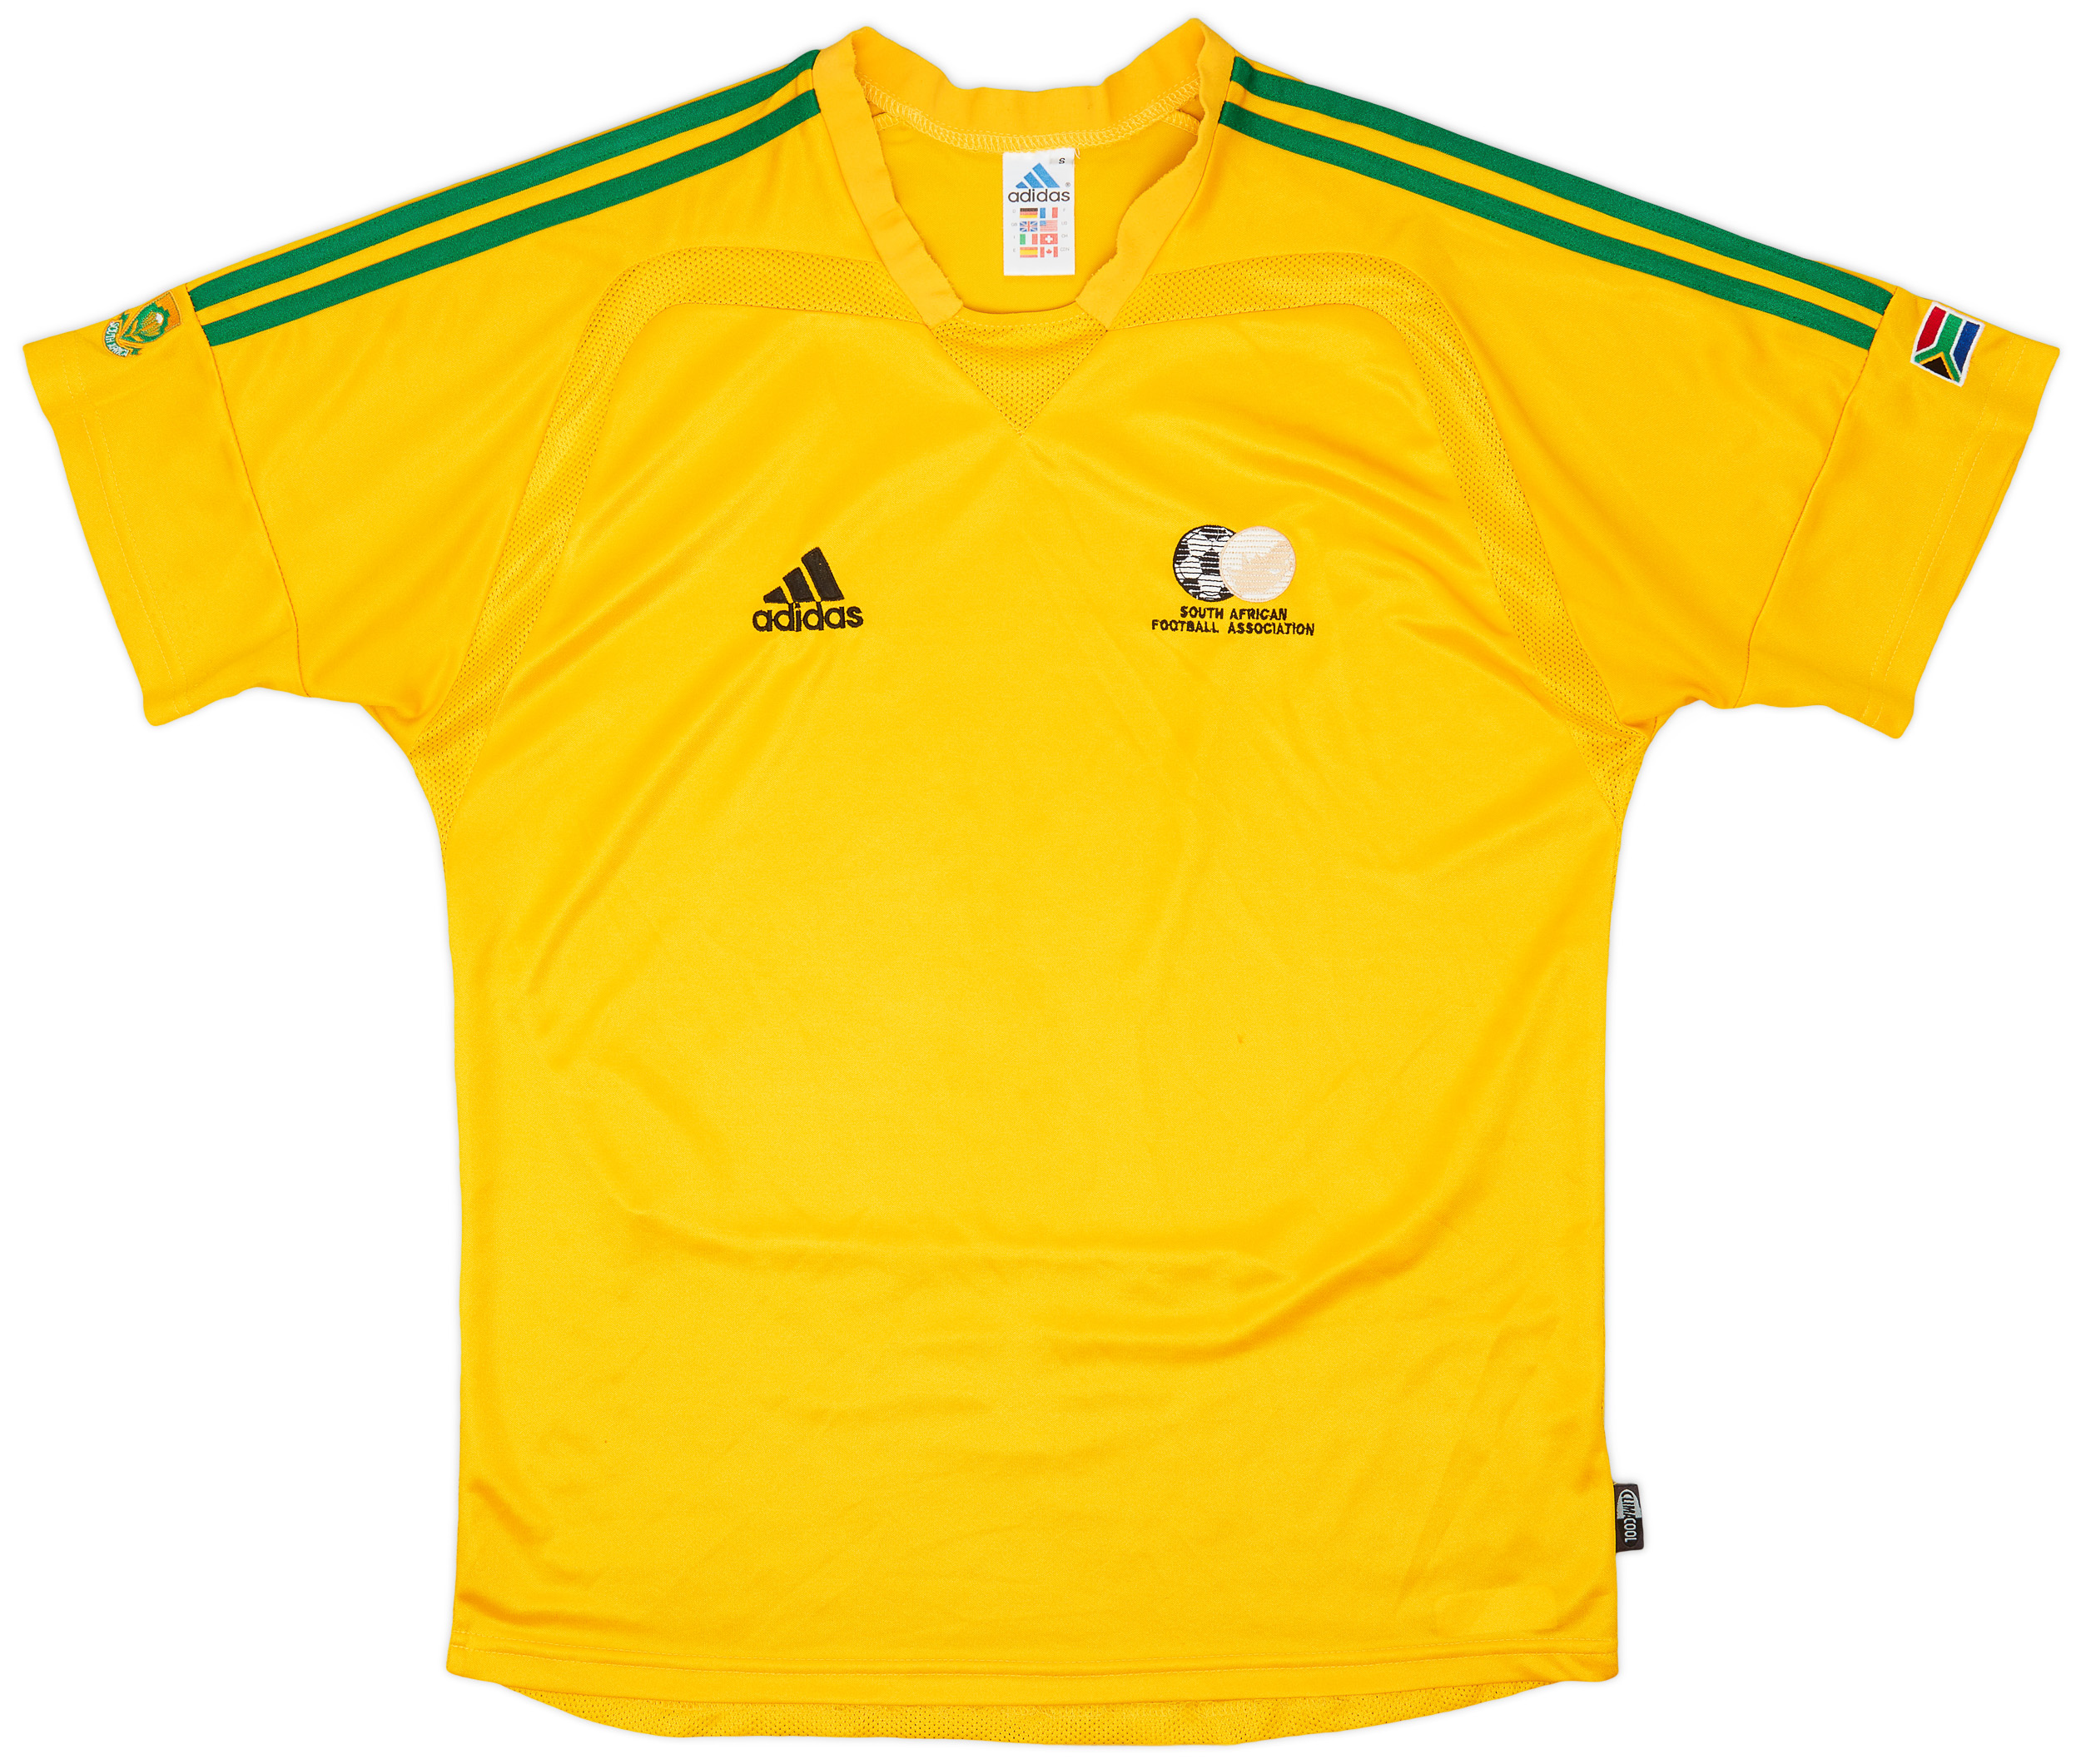 2004-06 South Africa Home Shirt - 8/10 - ()